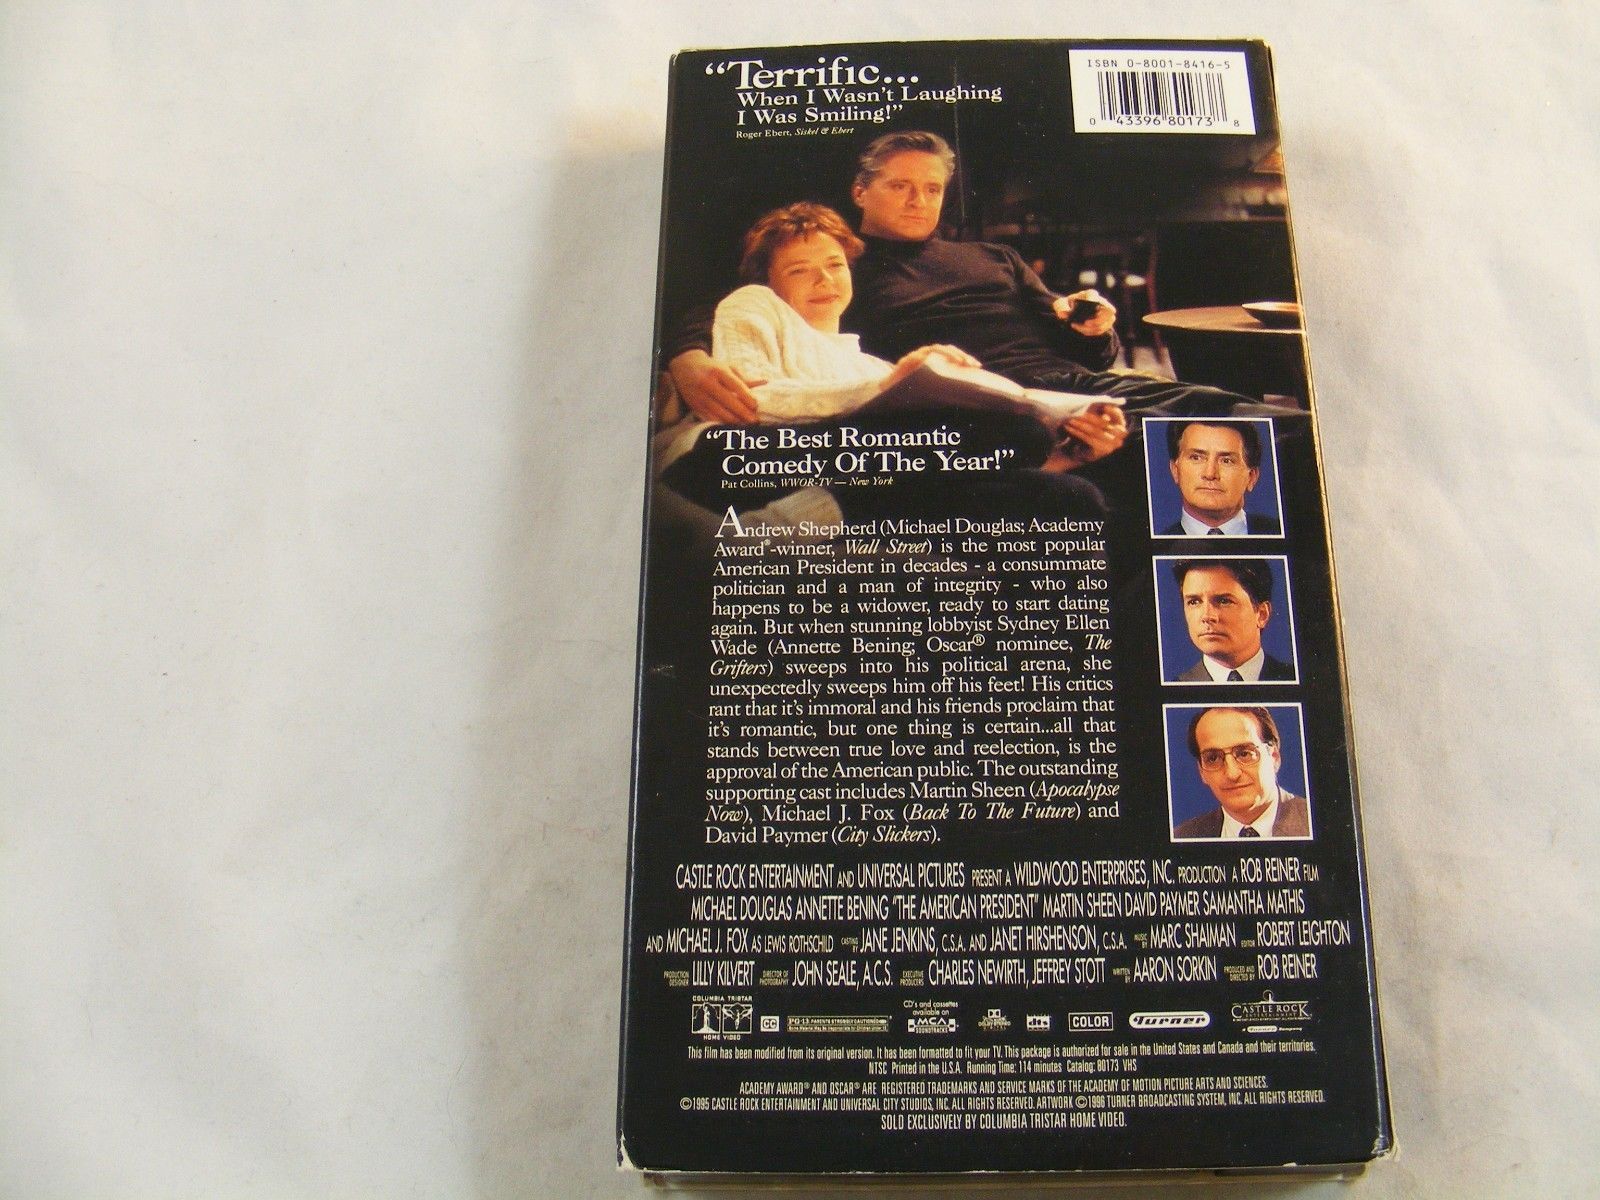 The American President Vhs Michael Douglas, and similar items